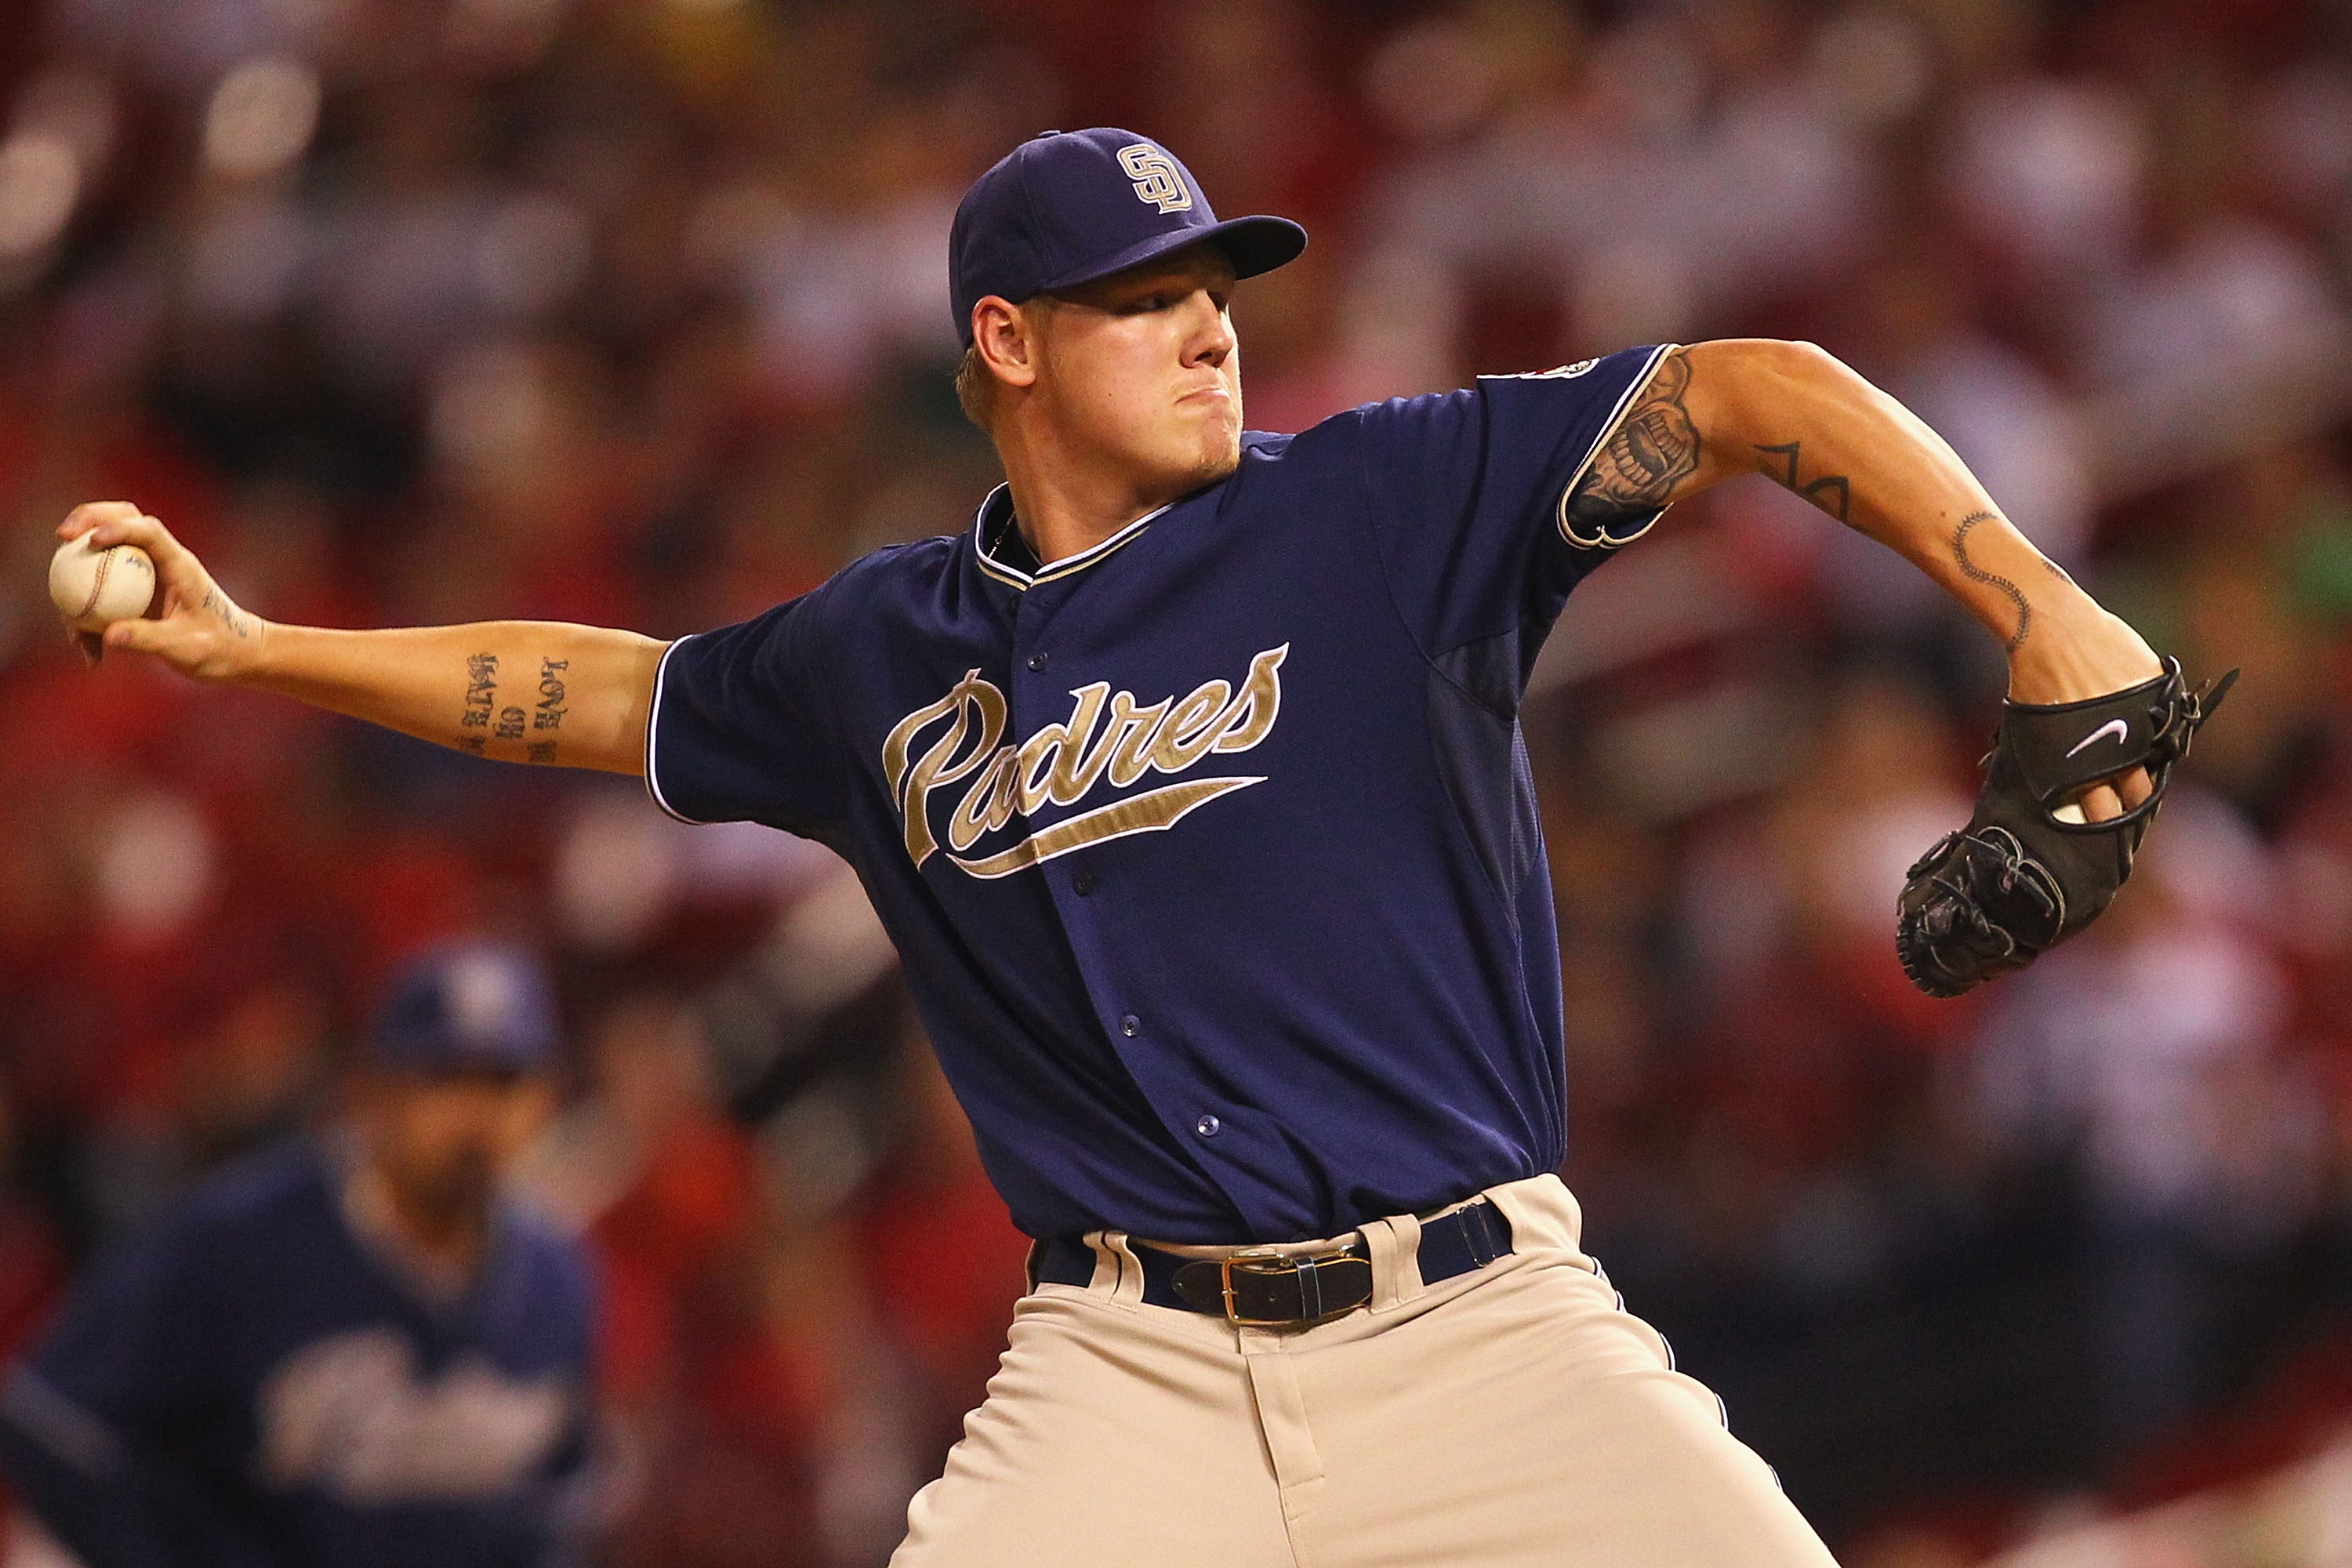 Greinke bests Carpenter to lift Brewers over Cards